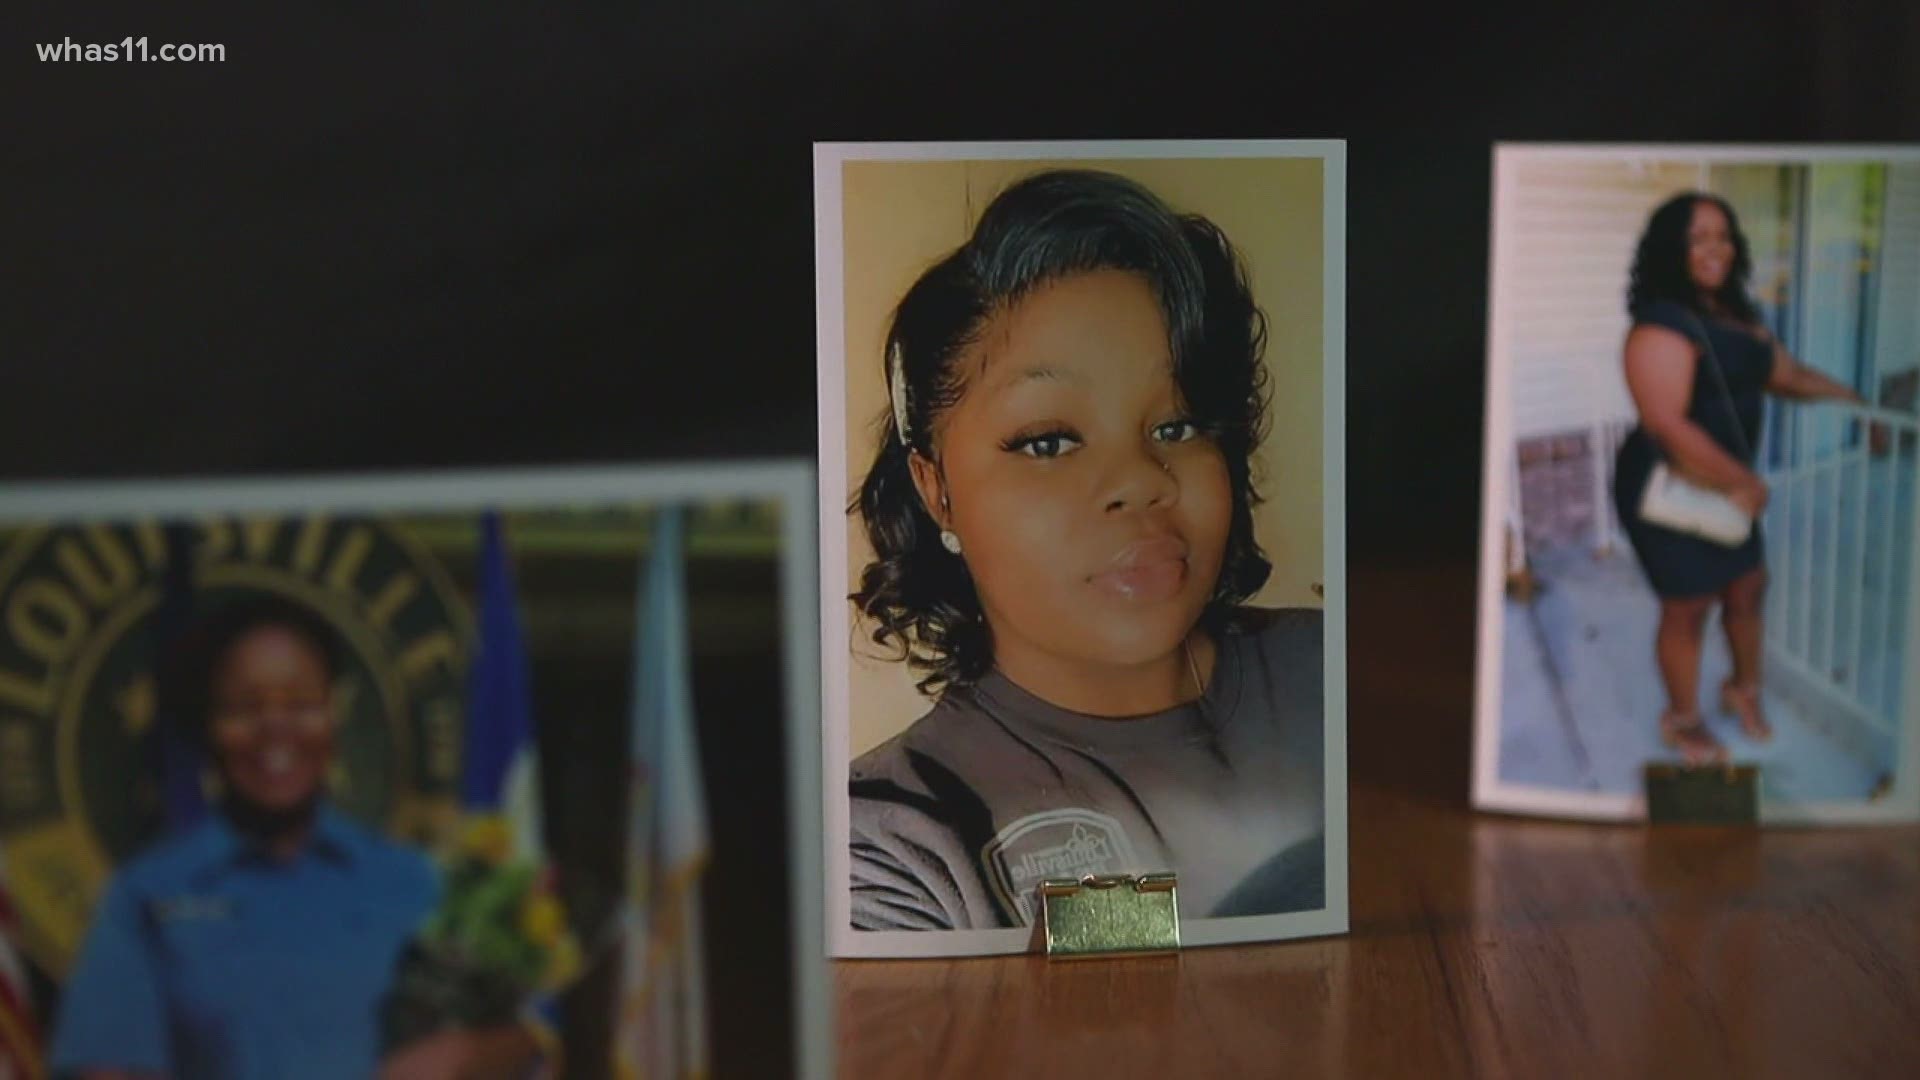 Attorney Lonita Baker says for Breonna Taylor's family, the Derek Chauvin guilty verdict is bittersweet.